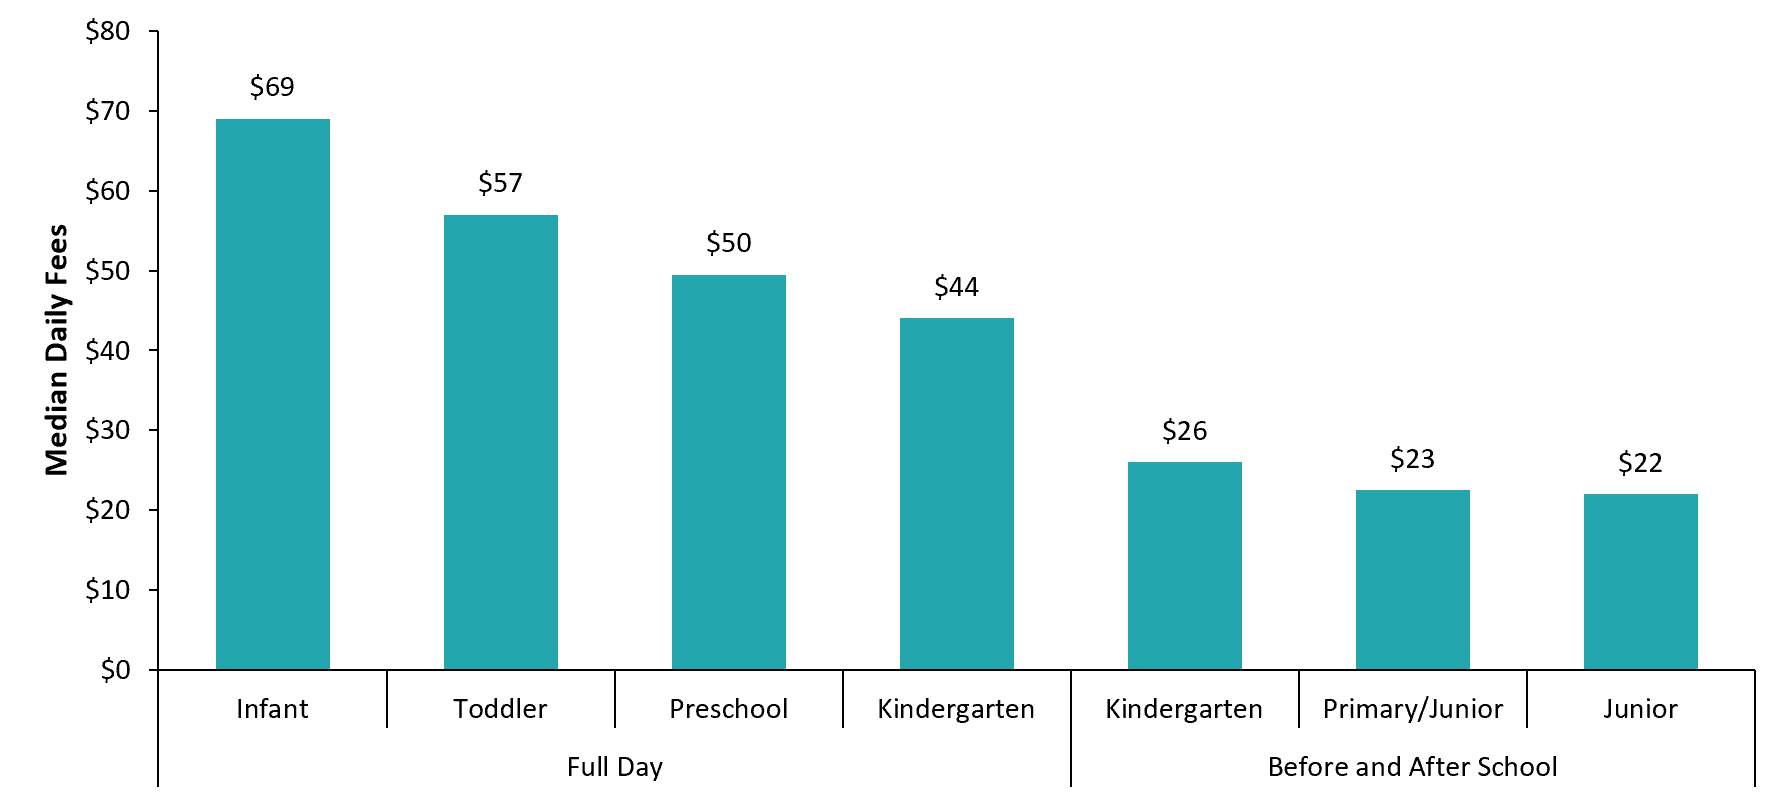 Median daily fees by age group among licensed child care centres, 2021